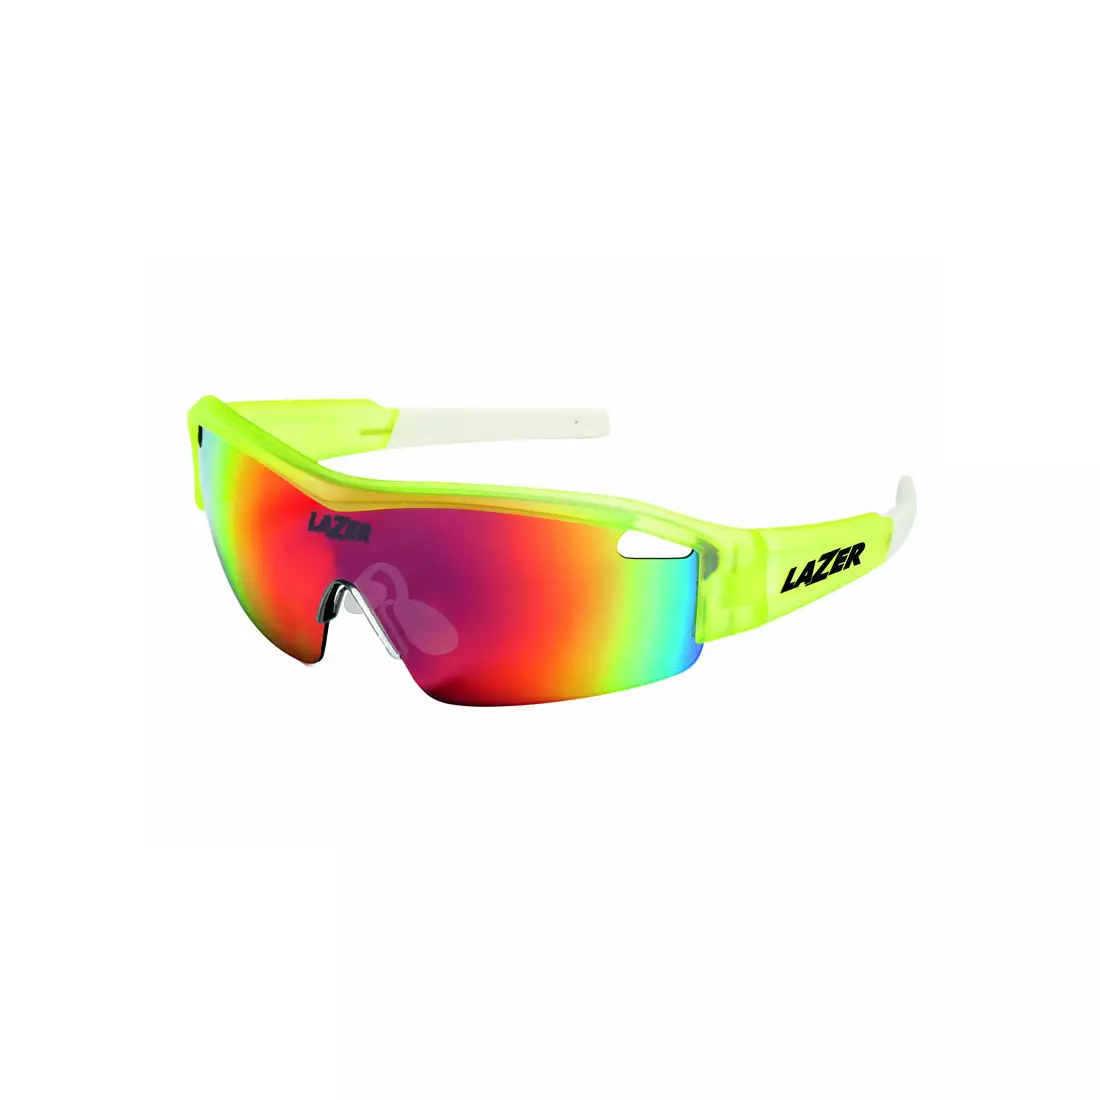 LAZER SOLID STATE1 Flash Žlté okuliare (Smoke-Black Red REVO. Yellow-Blue Mirror. Clear) LZR-OKL-SOLD-FLYELL